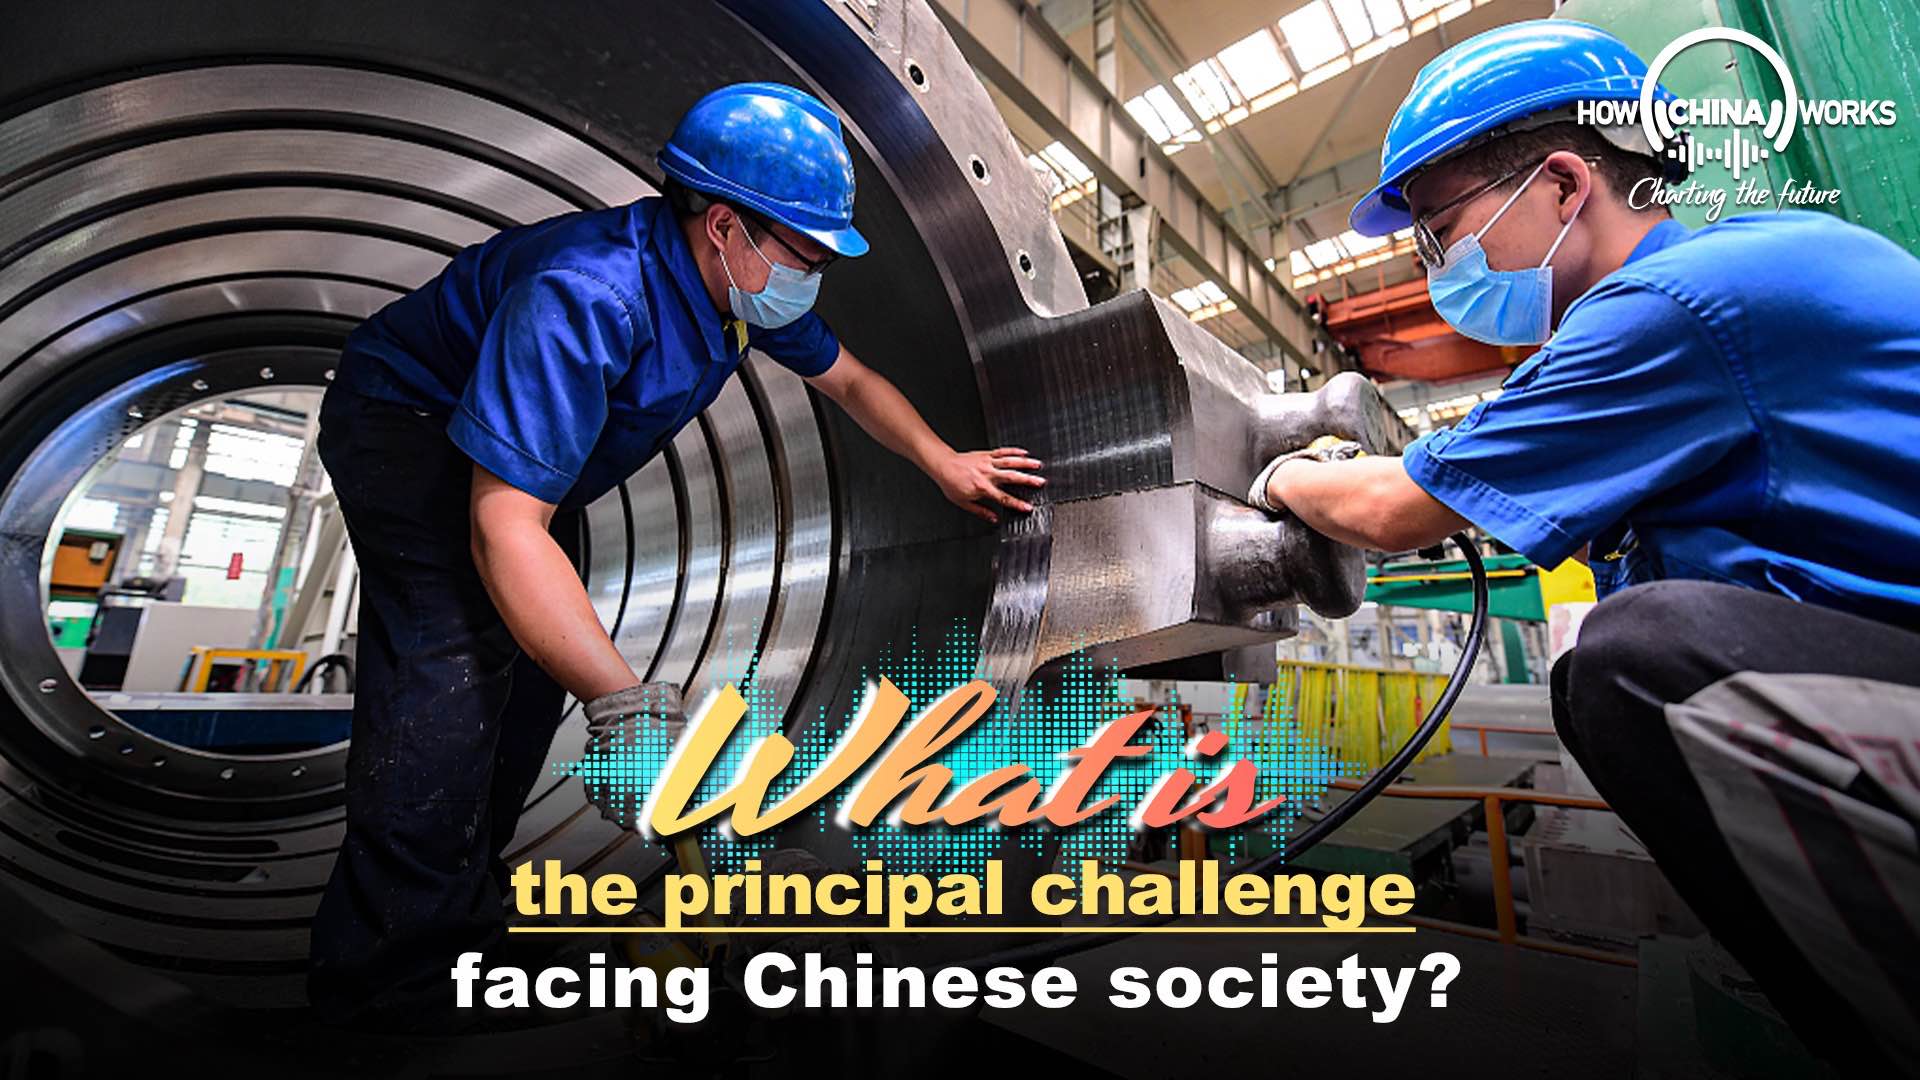 What is the principal challenge facing Chinese society?